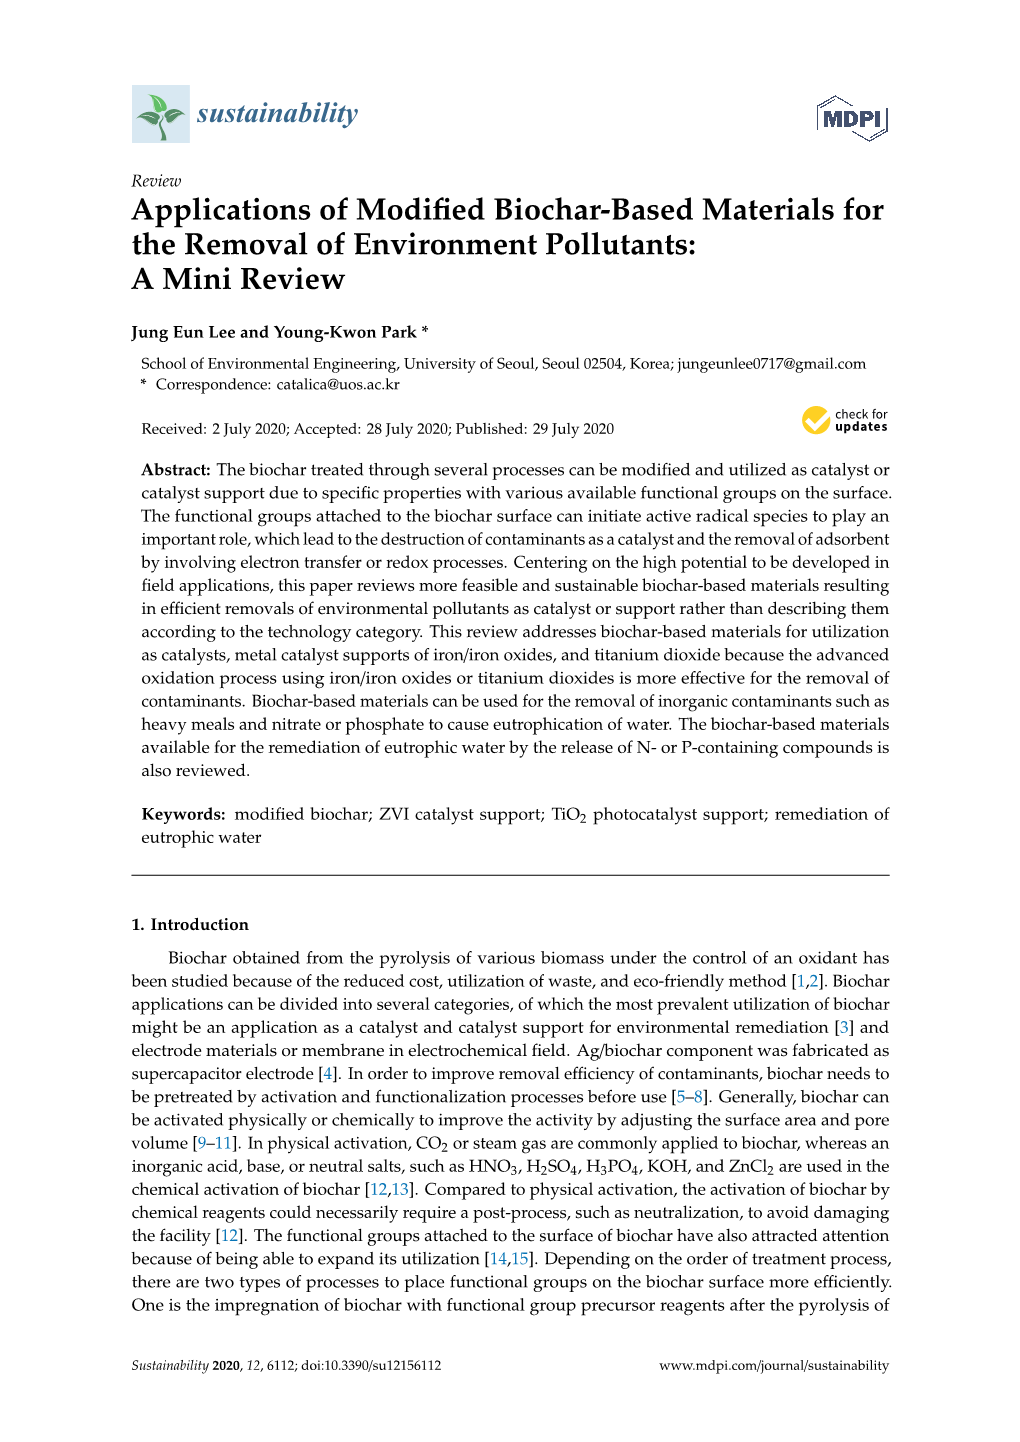 Applications of Modified Biochar-Based Materials for the Removal of Environment Pollutants: a Mini Review